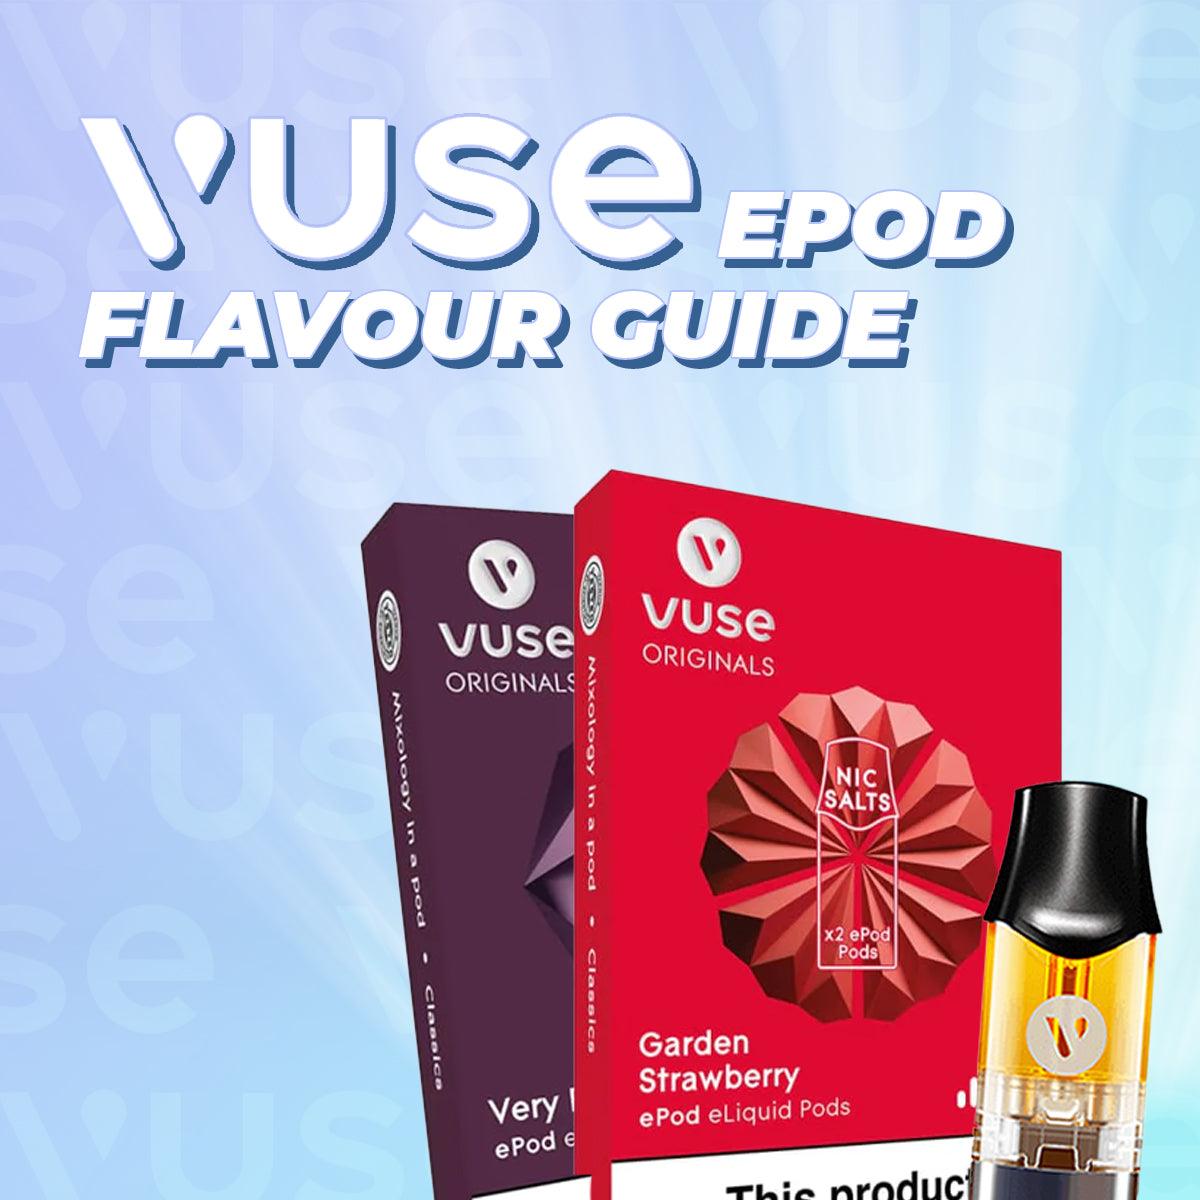 Vuse Vpro ePod Flavours List: A Complete Guide